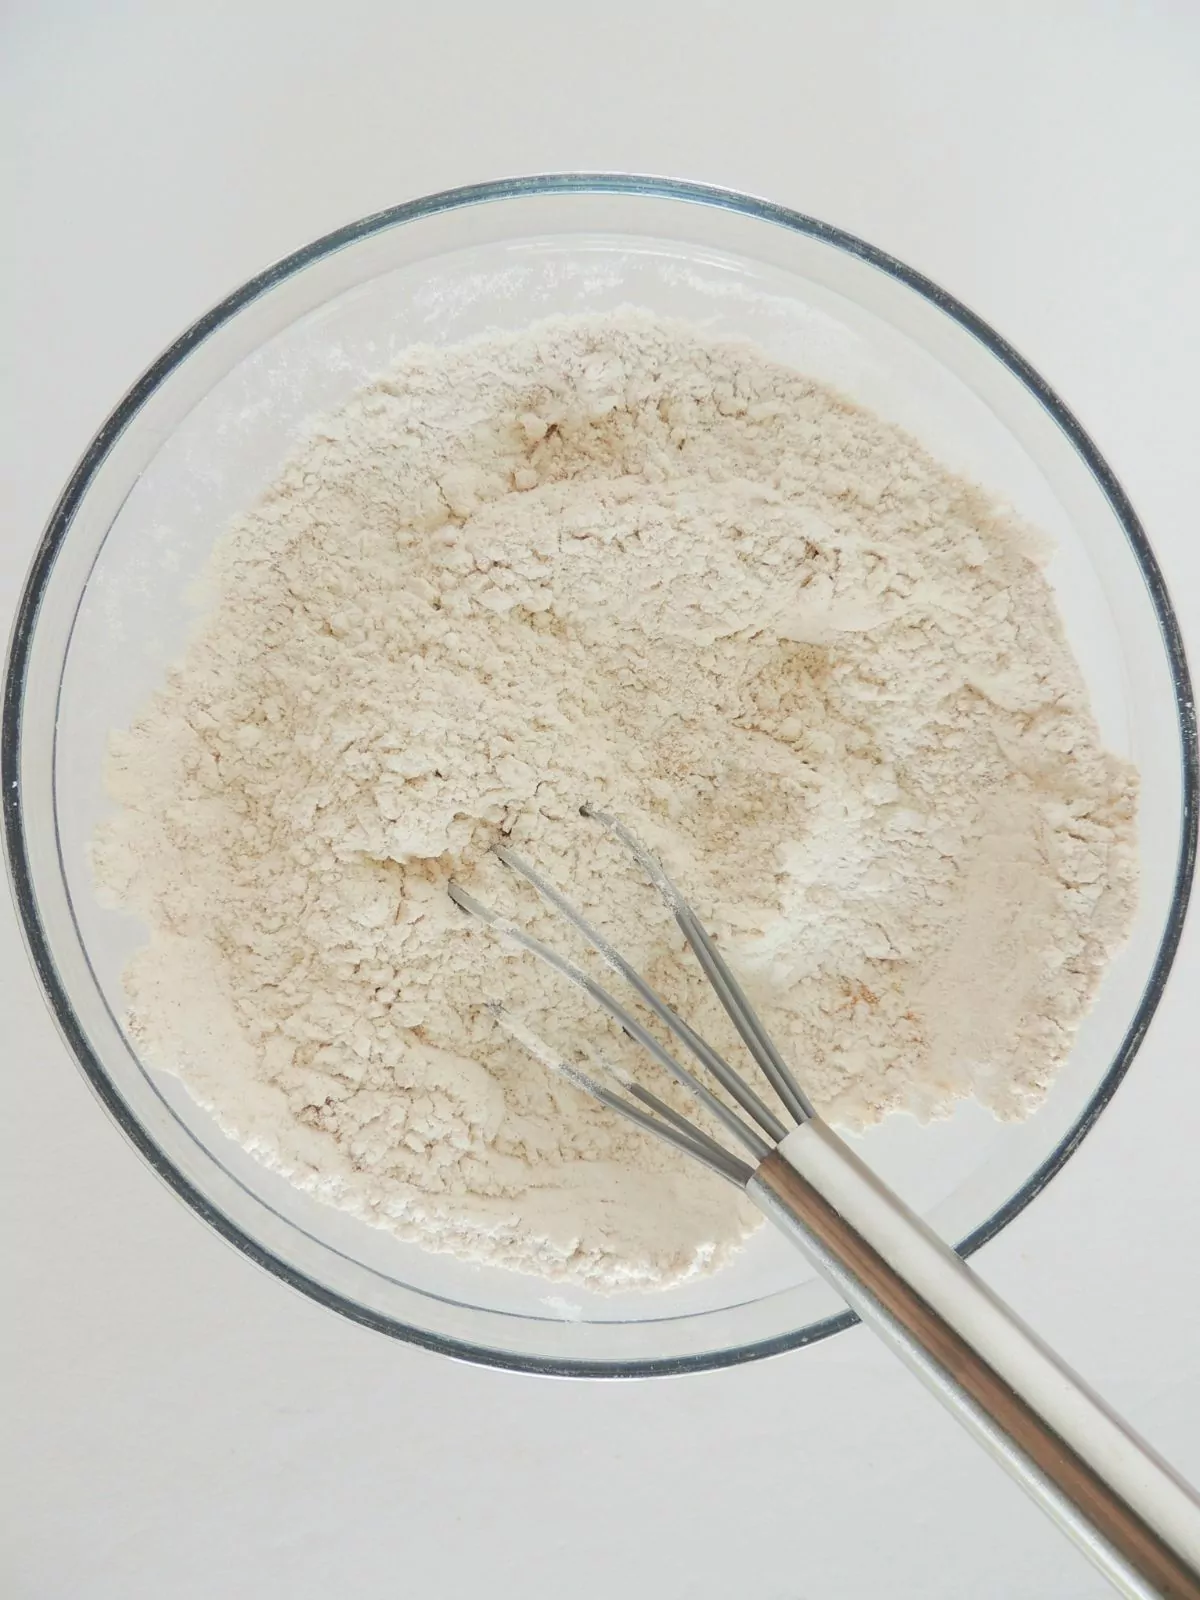 dry ingredients combined in bowl with whisk.